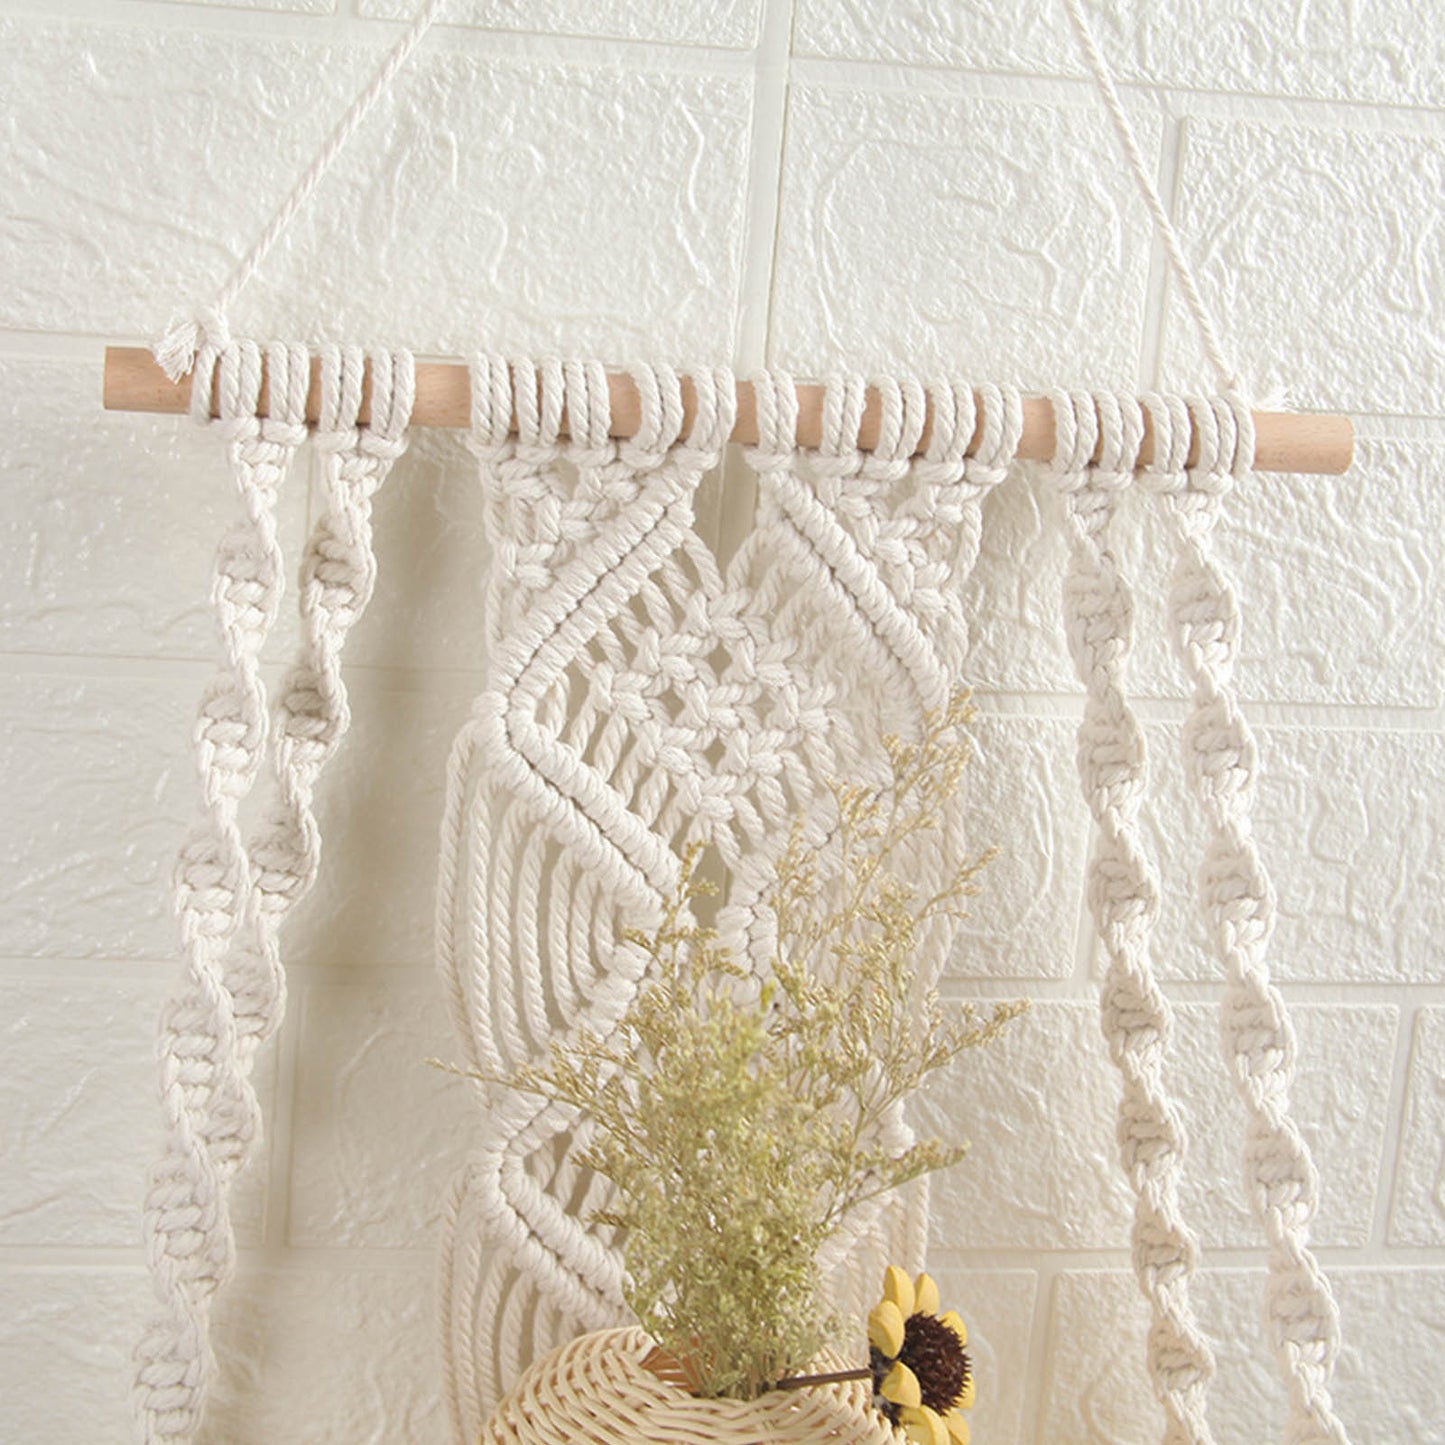 This Amber Macrame Shelf from Earth to Daisy is perfect for the modern plant mom in her indoor jungle! #plantsmakepeoplehappy